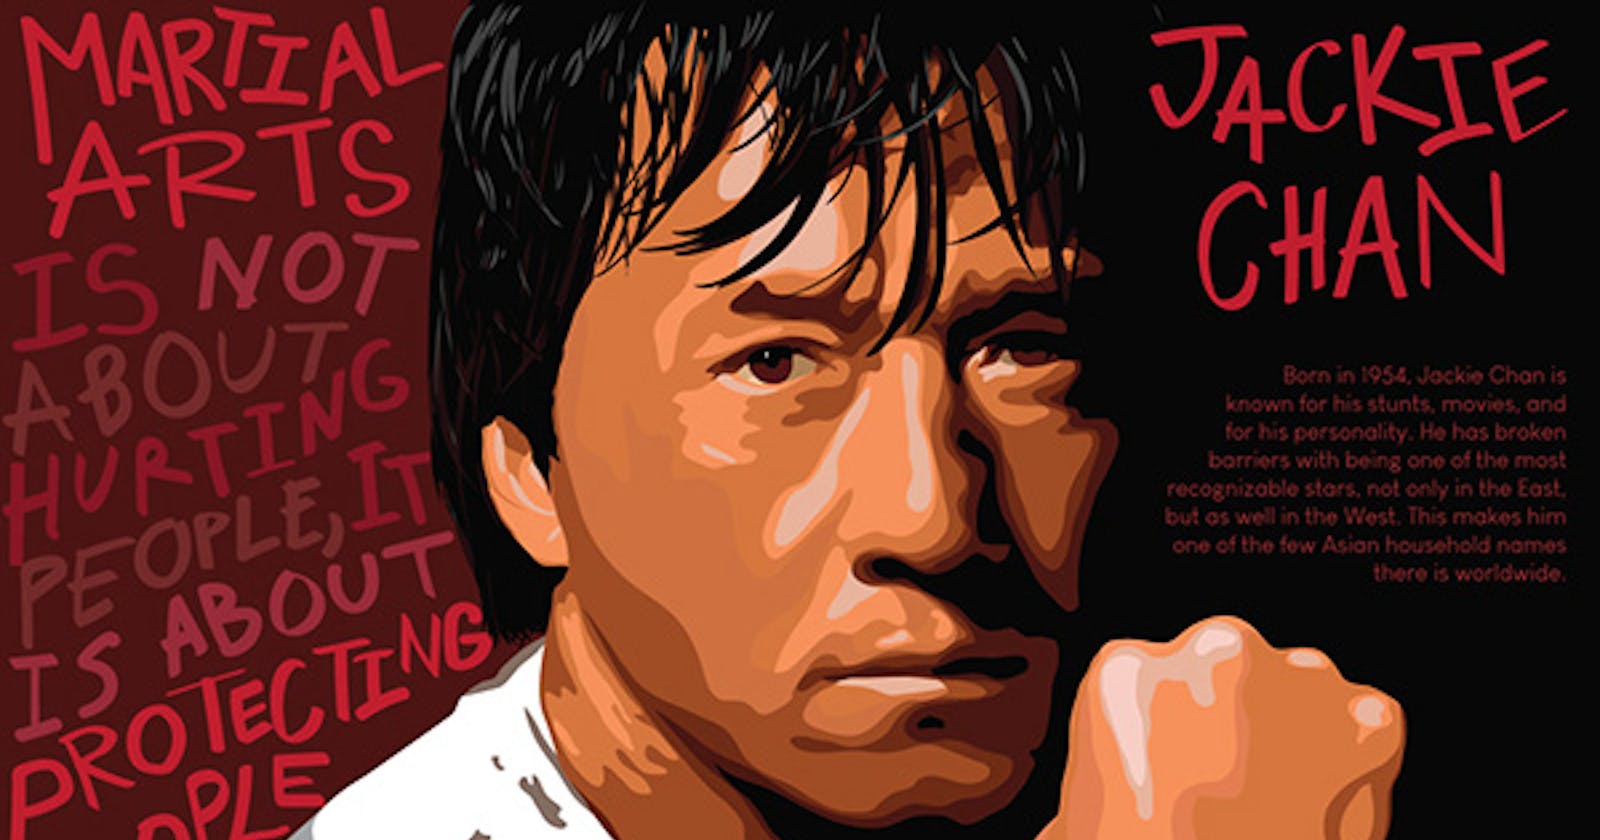 Jackie Chan and Mastery through Repetition